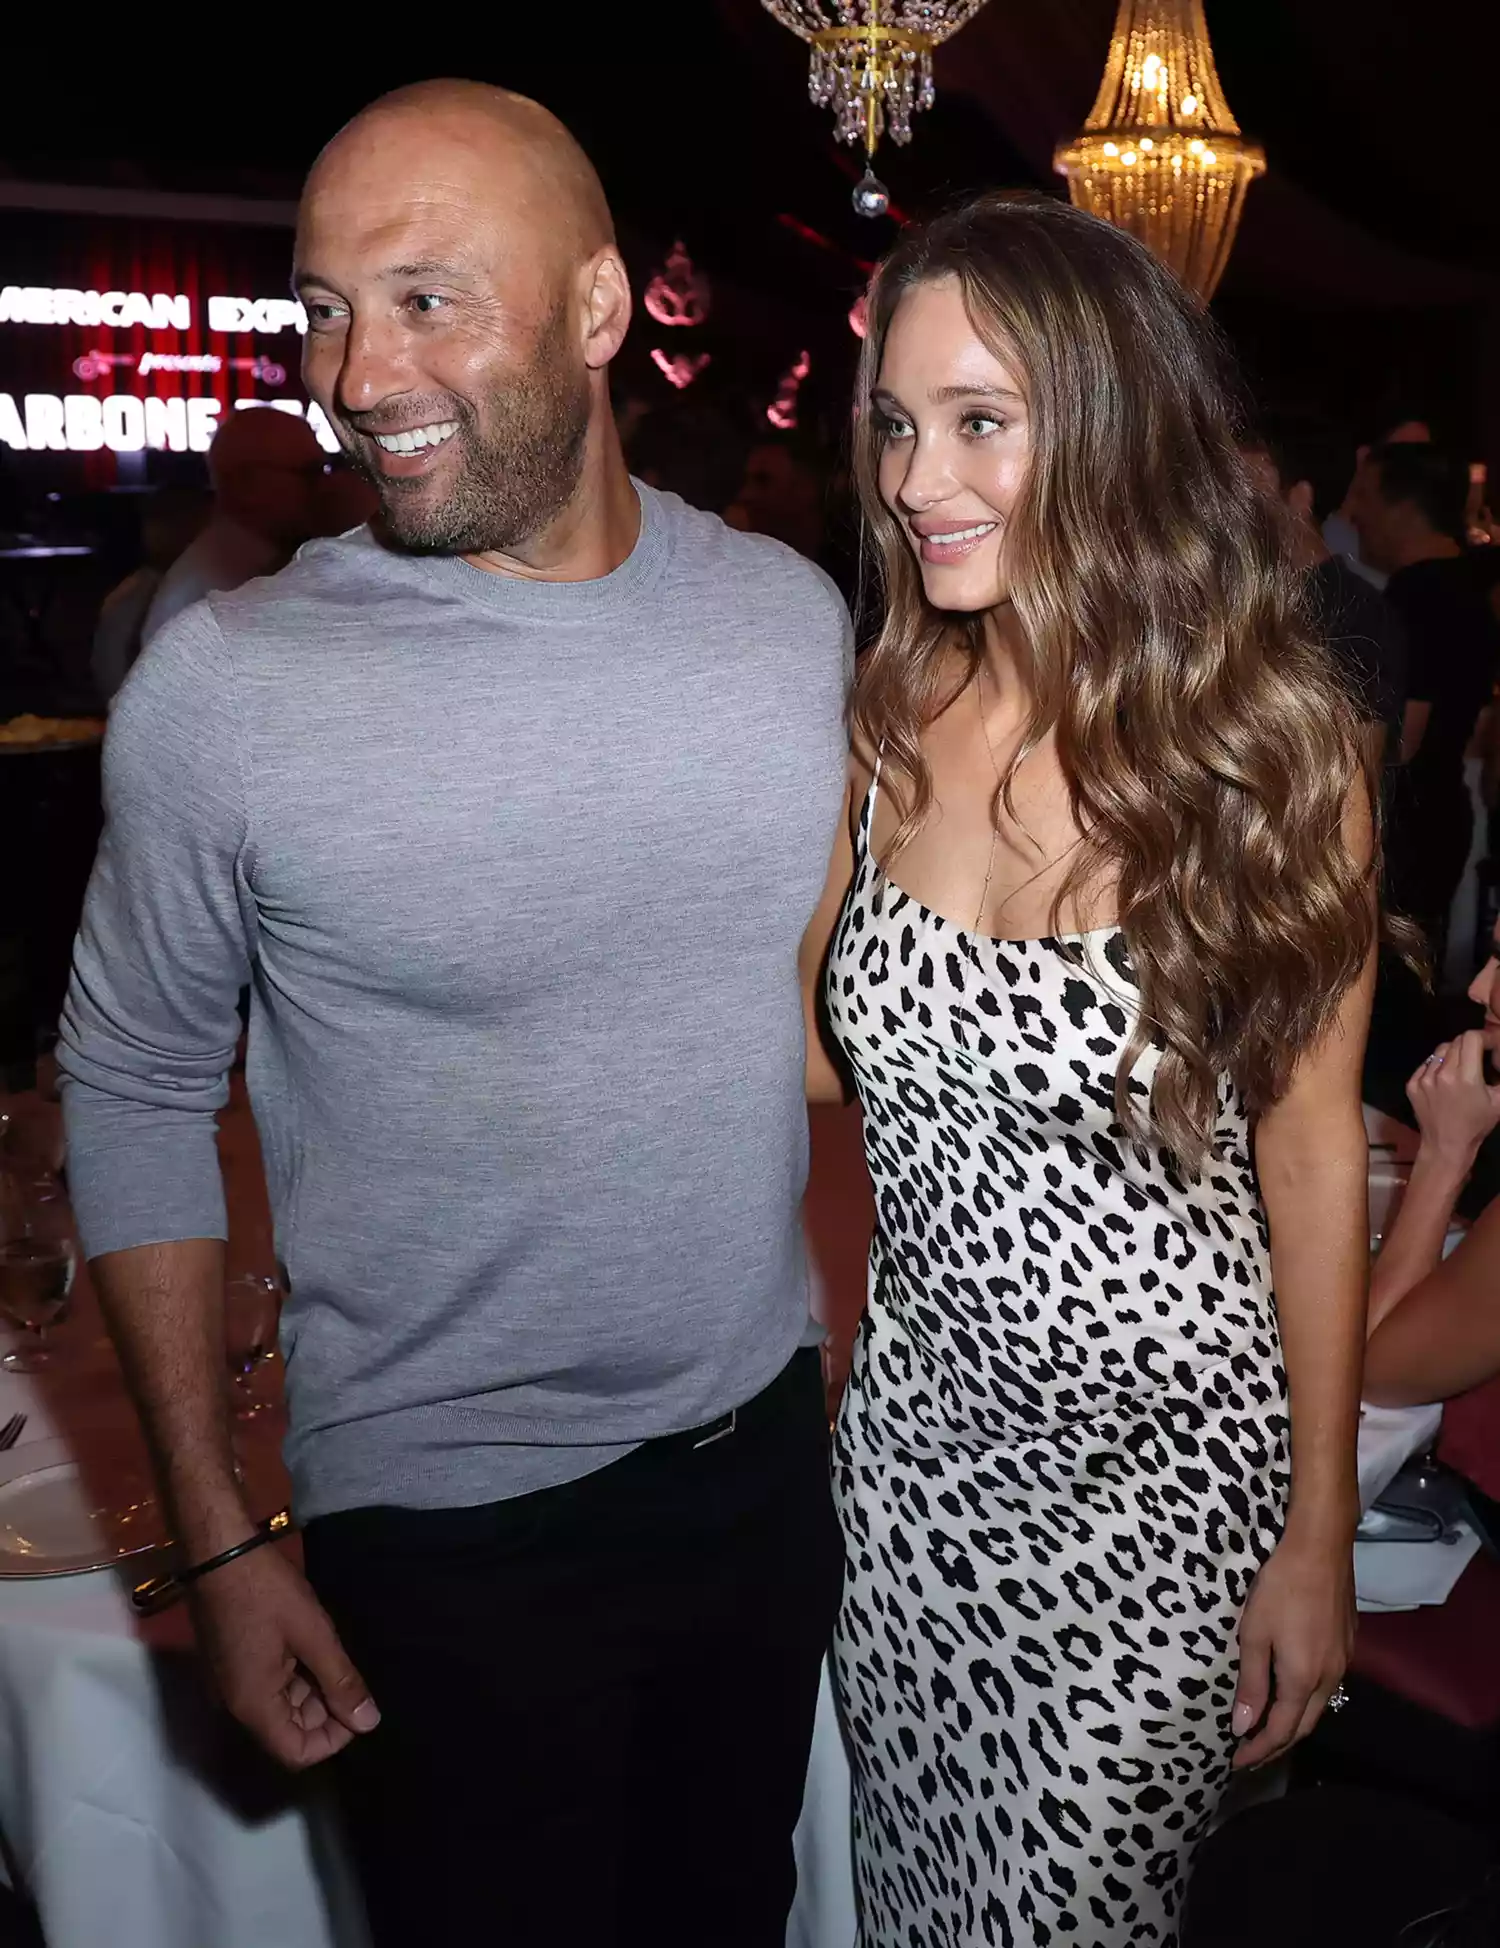 Derek Jeter and Hannah Jeter attend American Express Presents CARBONE Beach at Carbone on May 06, 2022 in Miami Beach, Florida